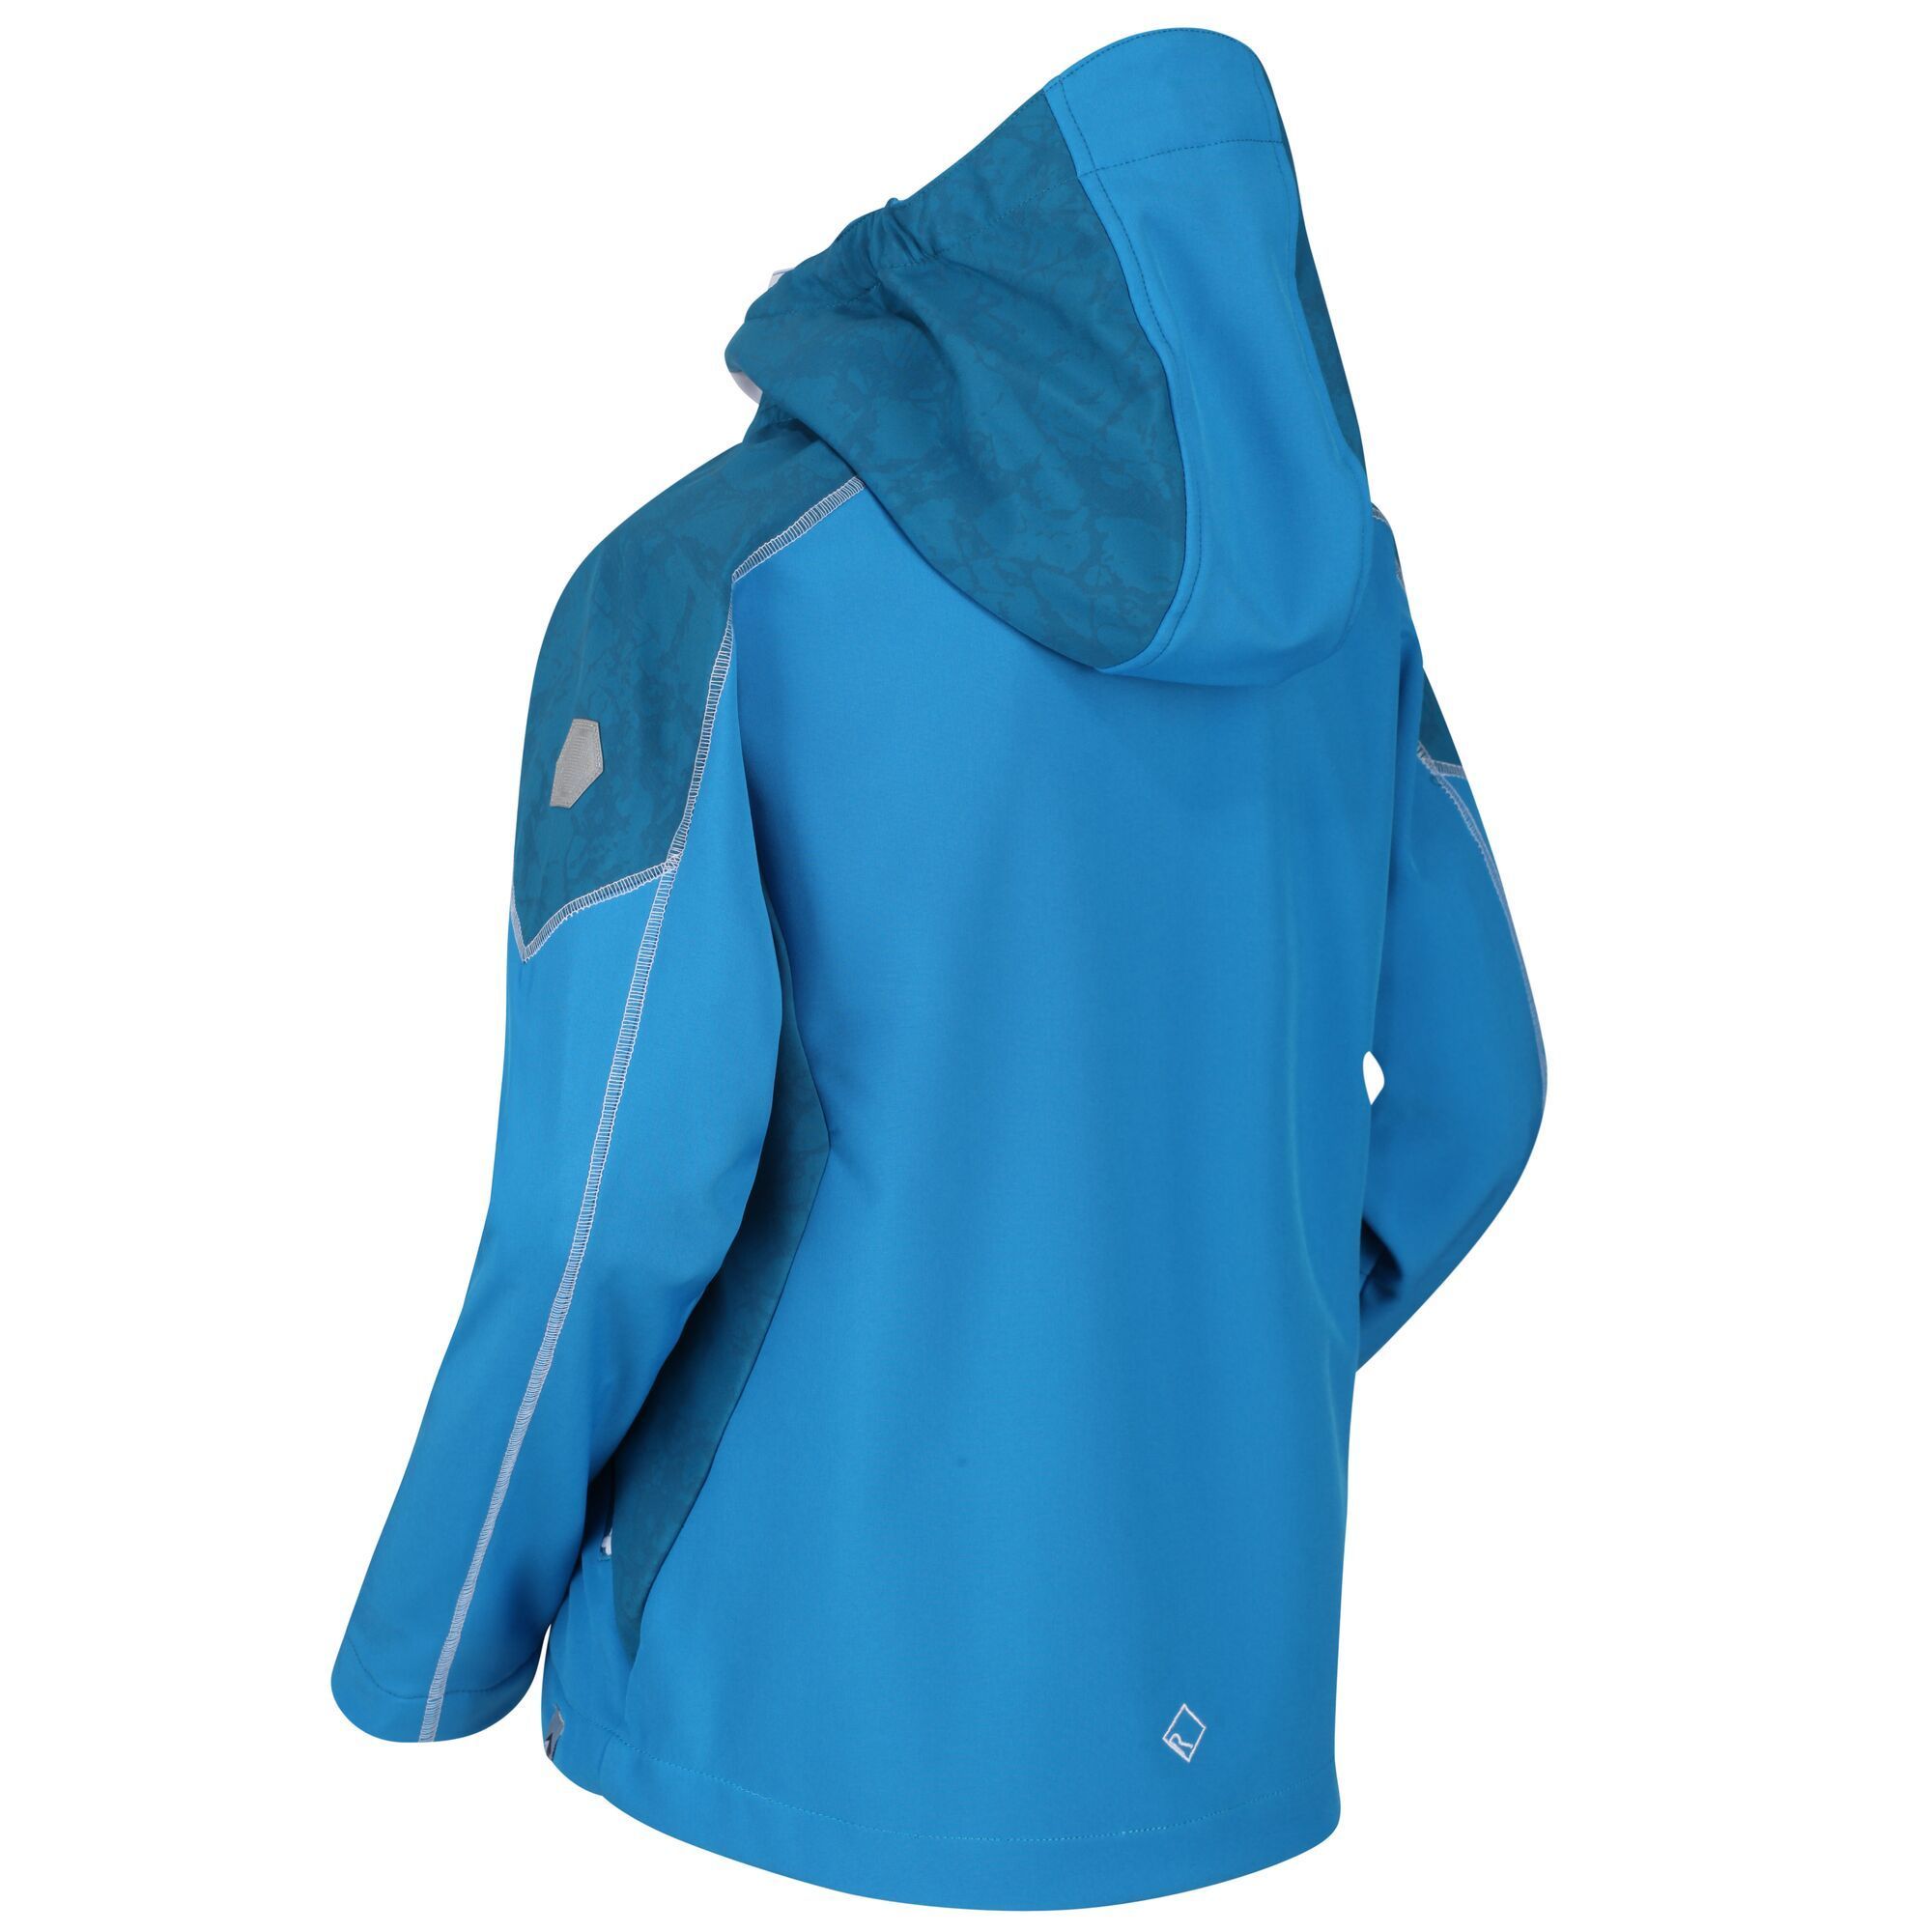 Material: 96% Polyester, 4% Elastane. Durable, water-repellent and lightweight softshell fabric jacket with elasticated hood. Highly reflective printed panels. Wind resistant. 2 zipped lower pockets.